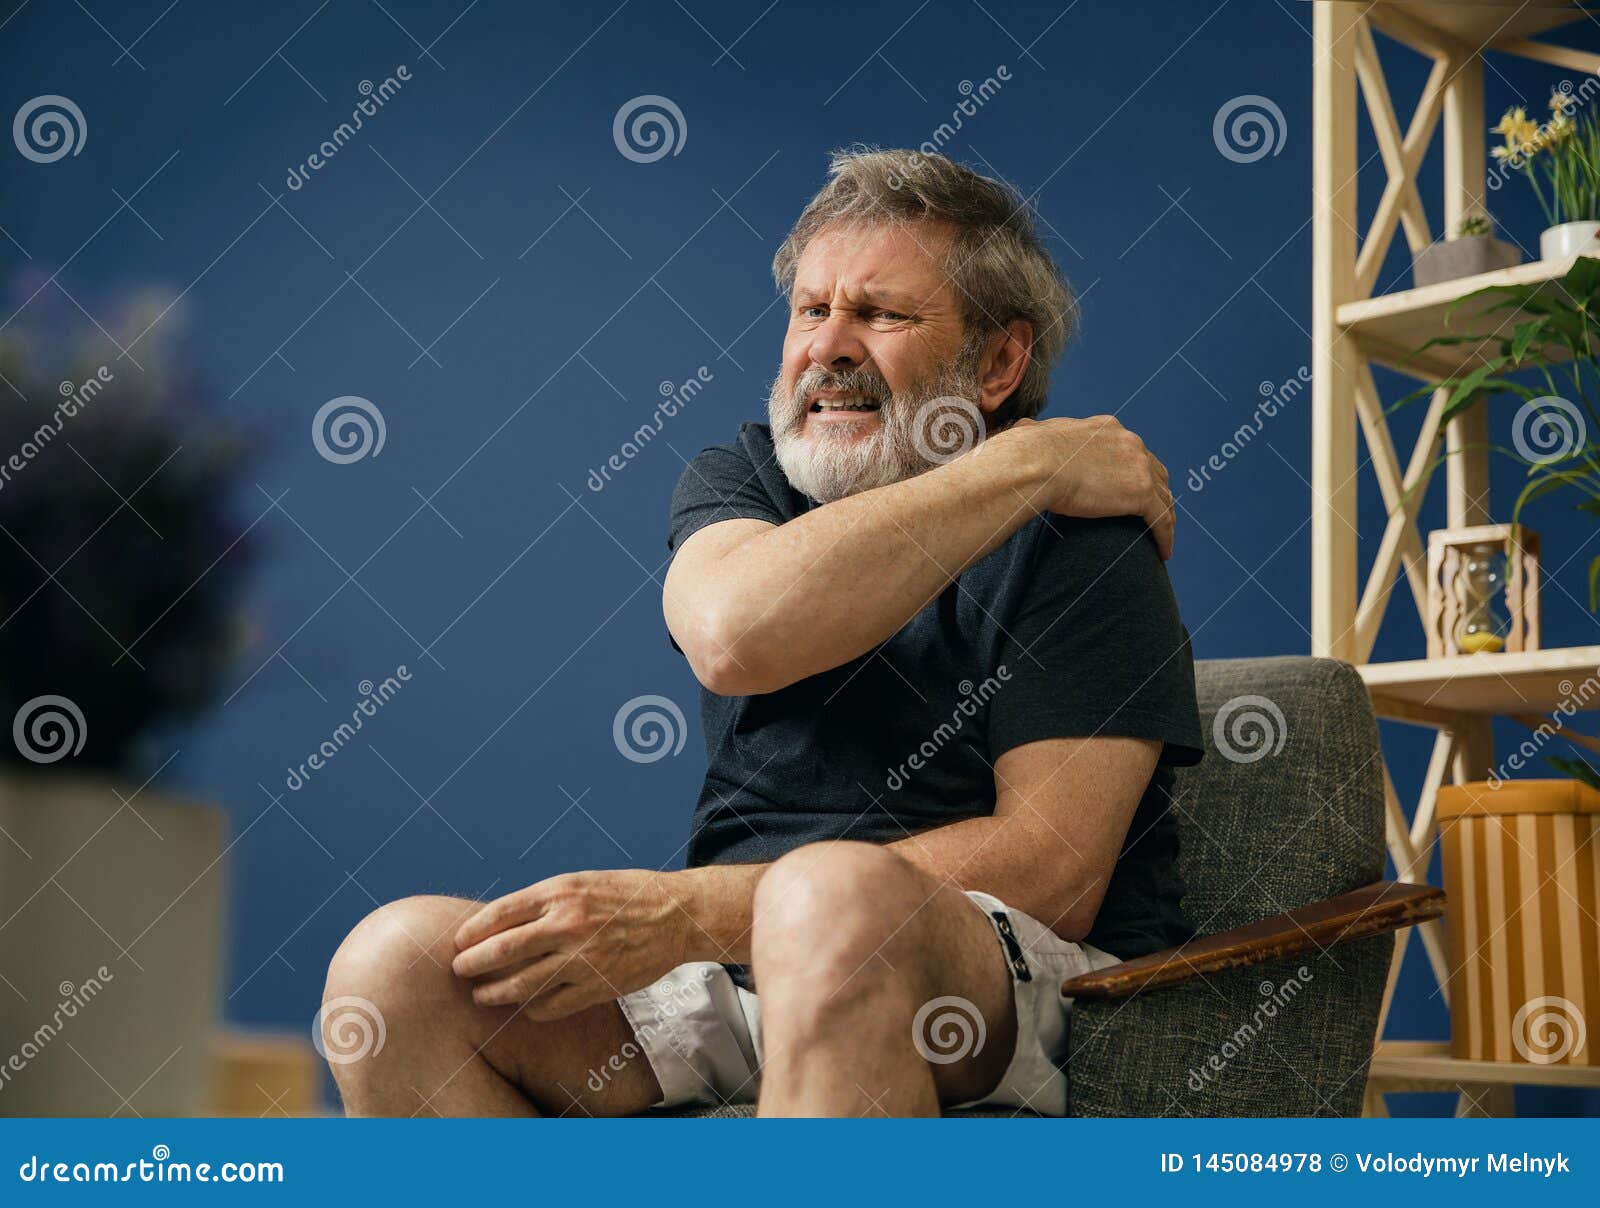 old bearded man suffering from pain